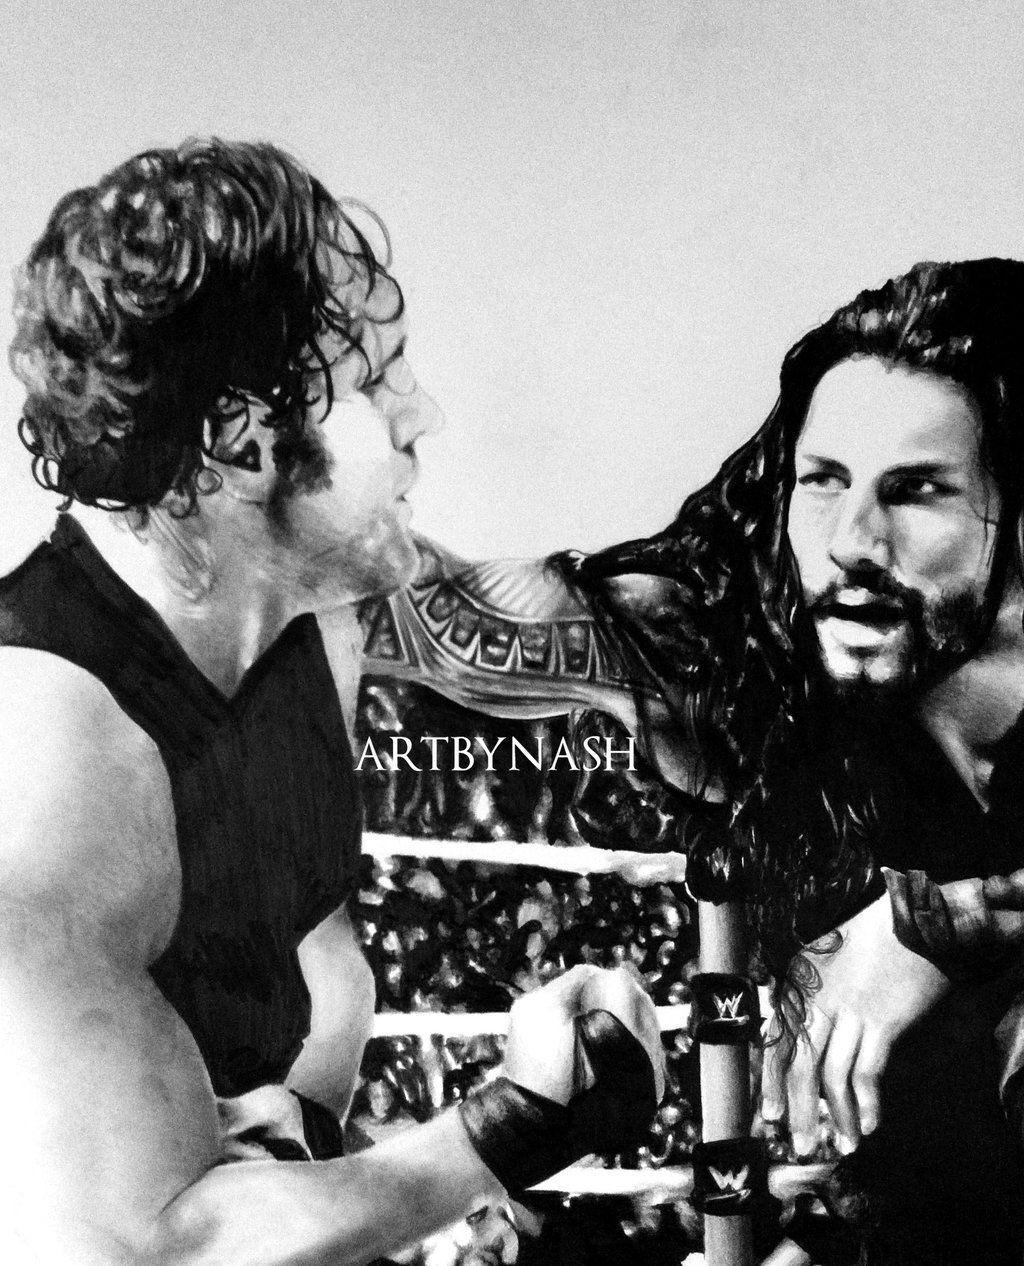 Brothers. Roman reigns and Dean ambrose